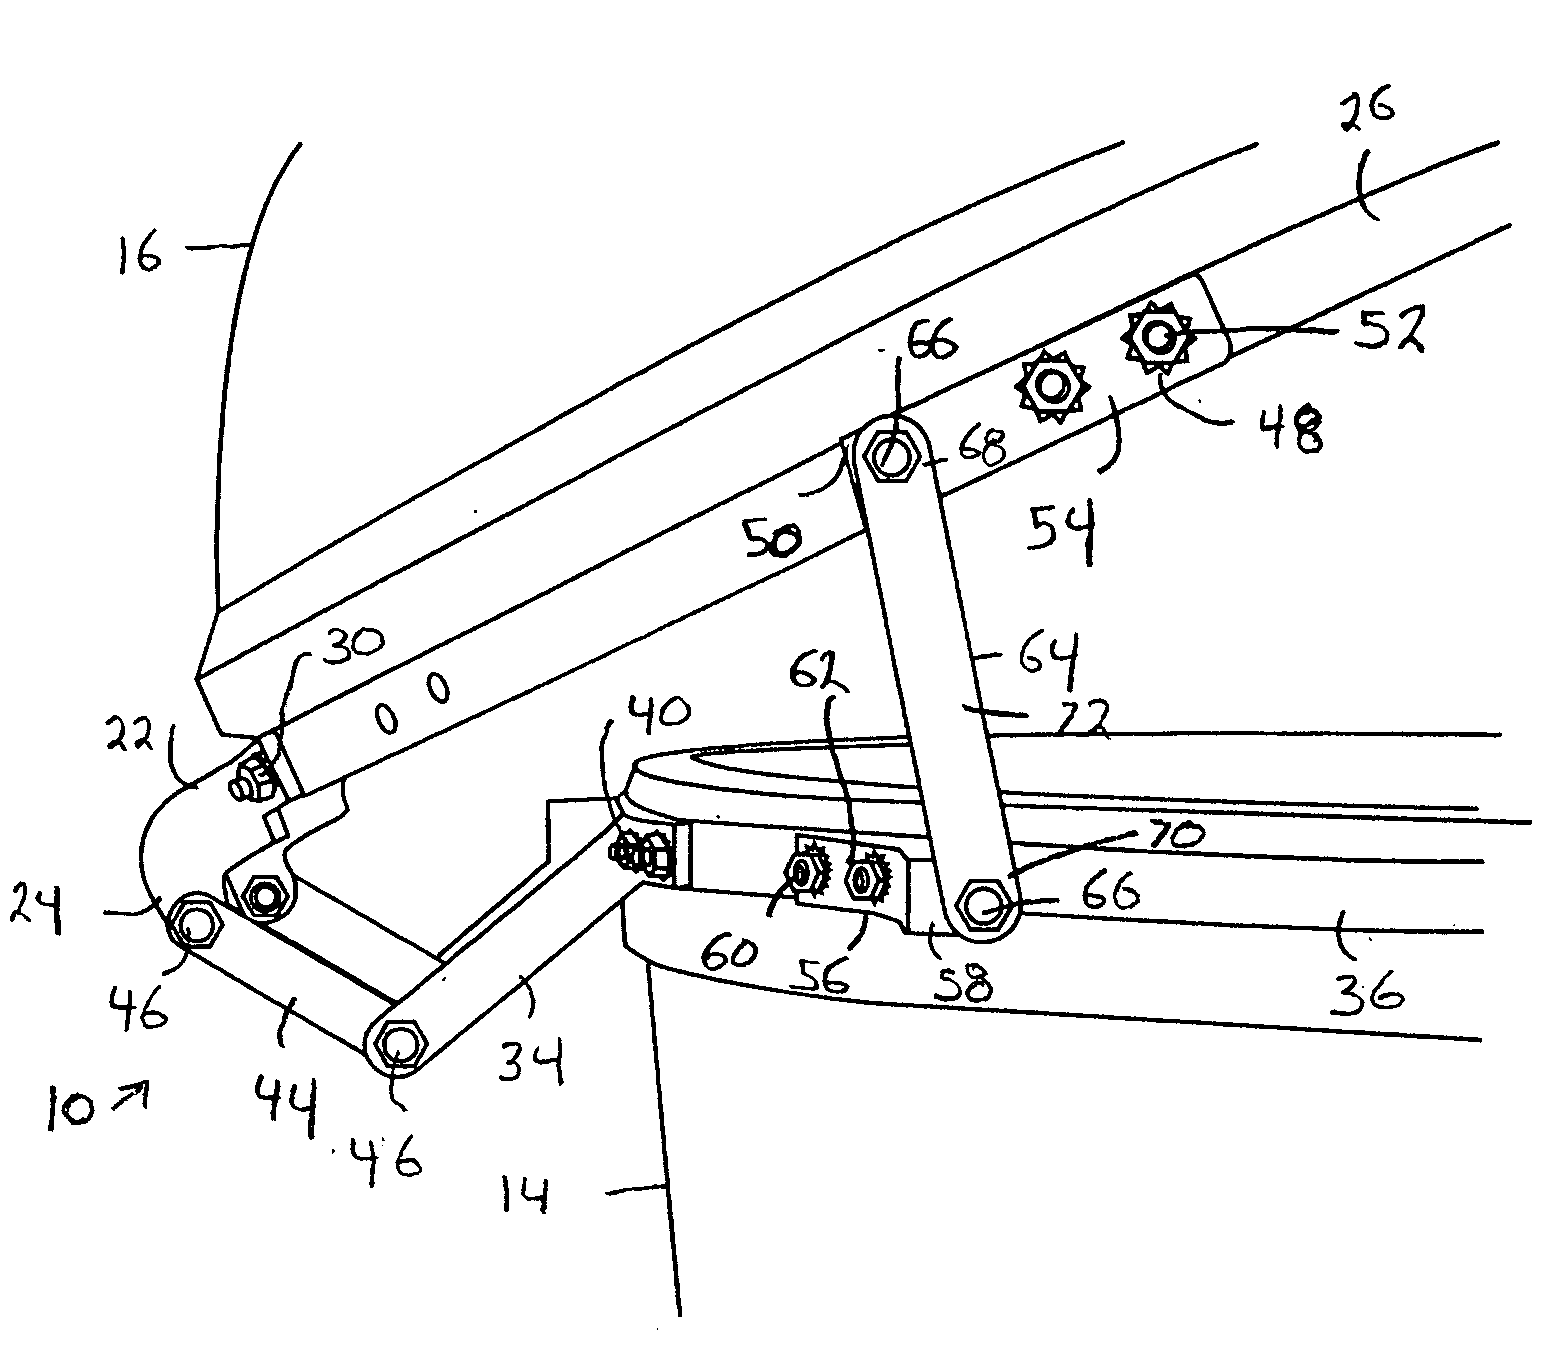 Hinge mechanism for barbeque grills and smokers